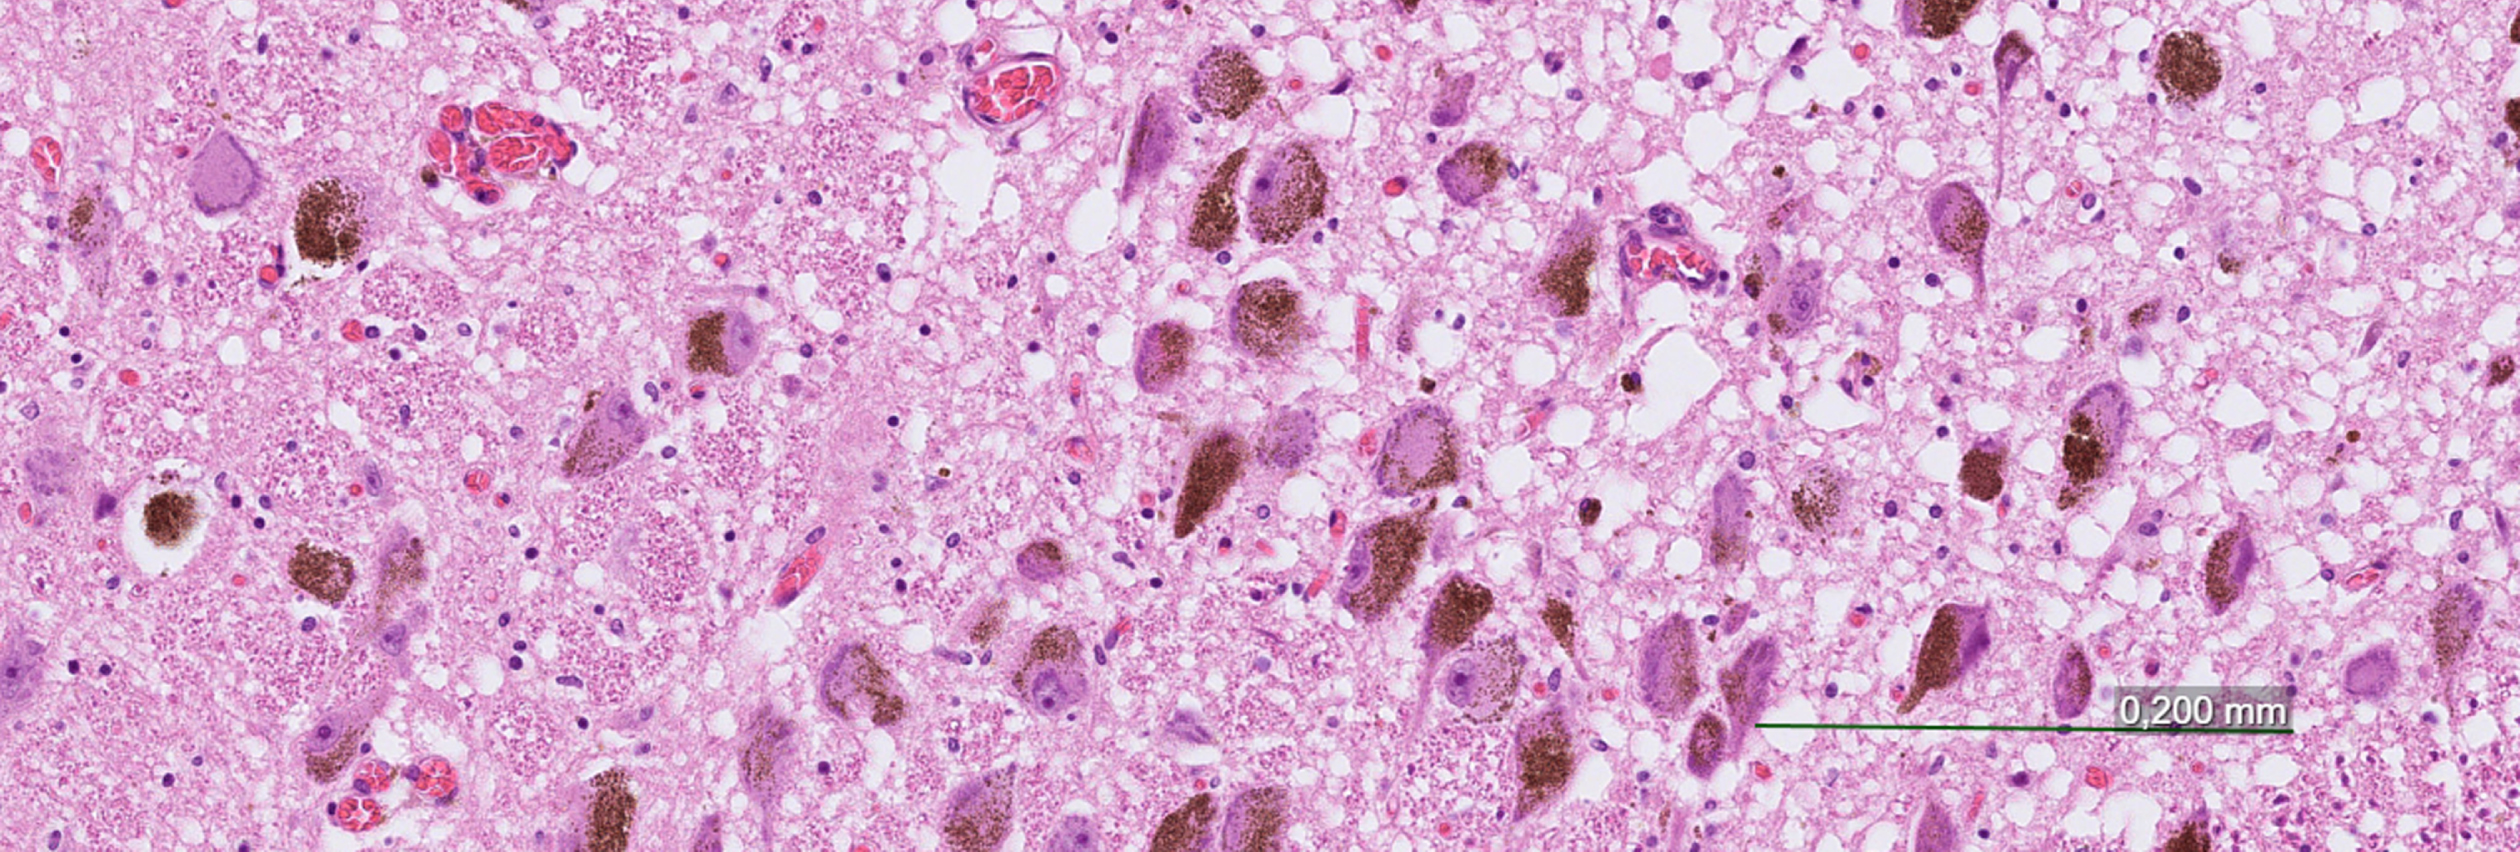 Example image of the locus coeruleus (LC) in neuropathological case diagnosed with frontotemporal lobar degeneration (FTLD) with transactive response DNA-binding protein 43 (TDP) proteinopathy at 13x magnification. Demonstrated in the image is the LC with a degeneration score 2 of 9 points possible according to the assessment tool introduced in the study. Scale bar representing 0.2 mm.